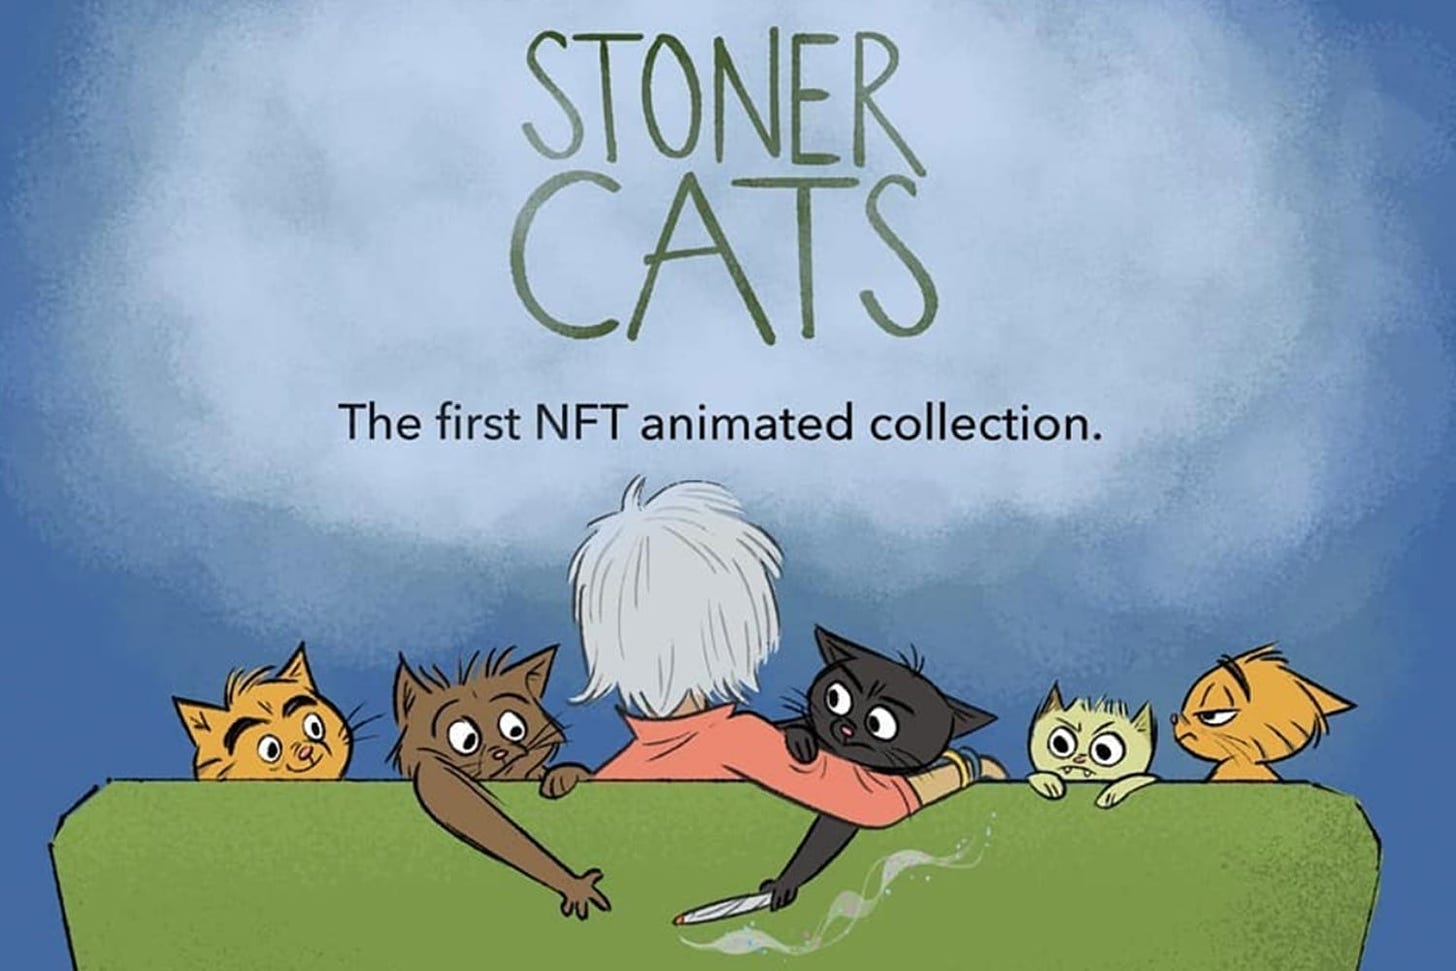 Stoner Cats' NFT Raises $8 Million in 35 Minutes Sending Gas Fees to 600  GWEI